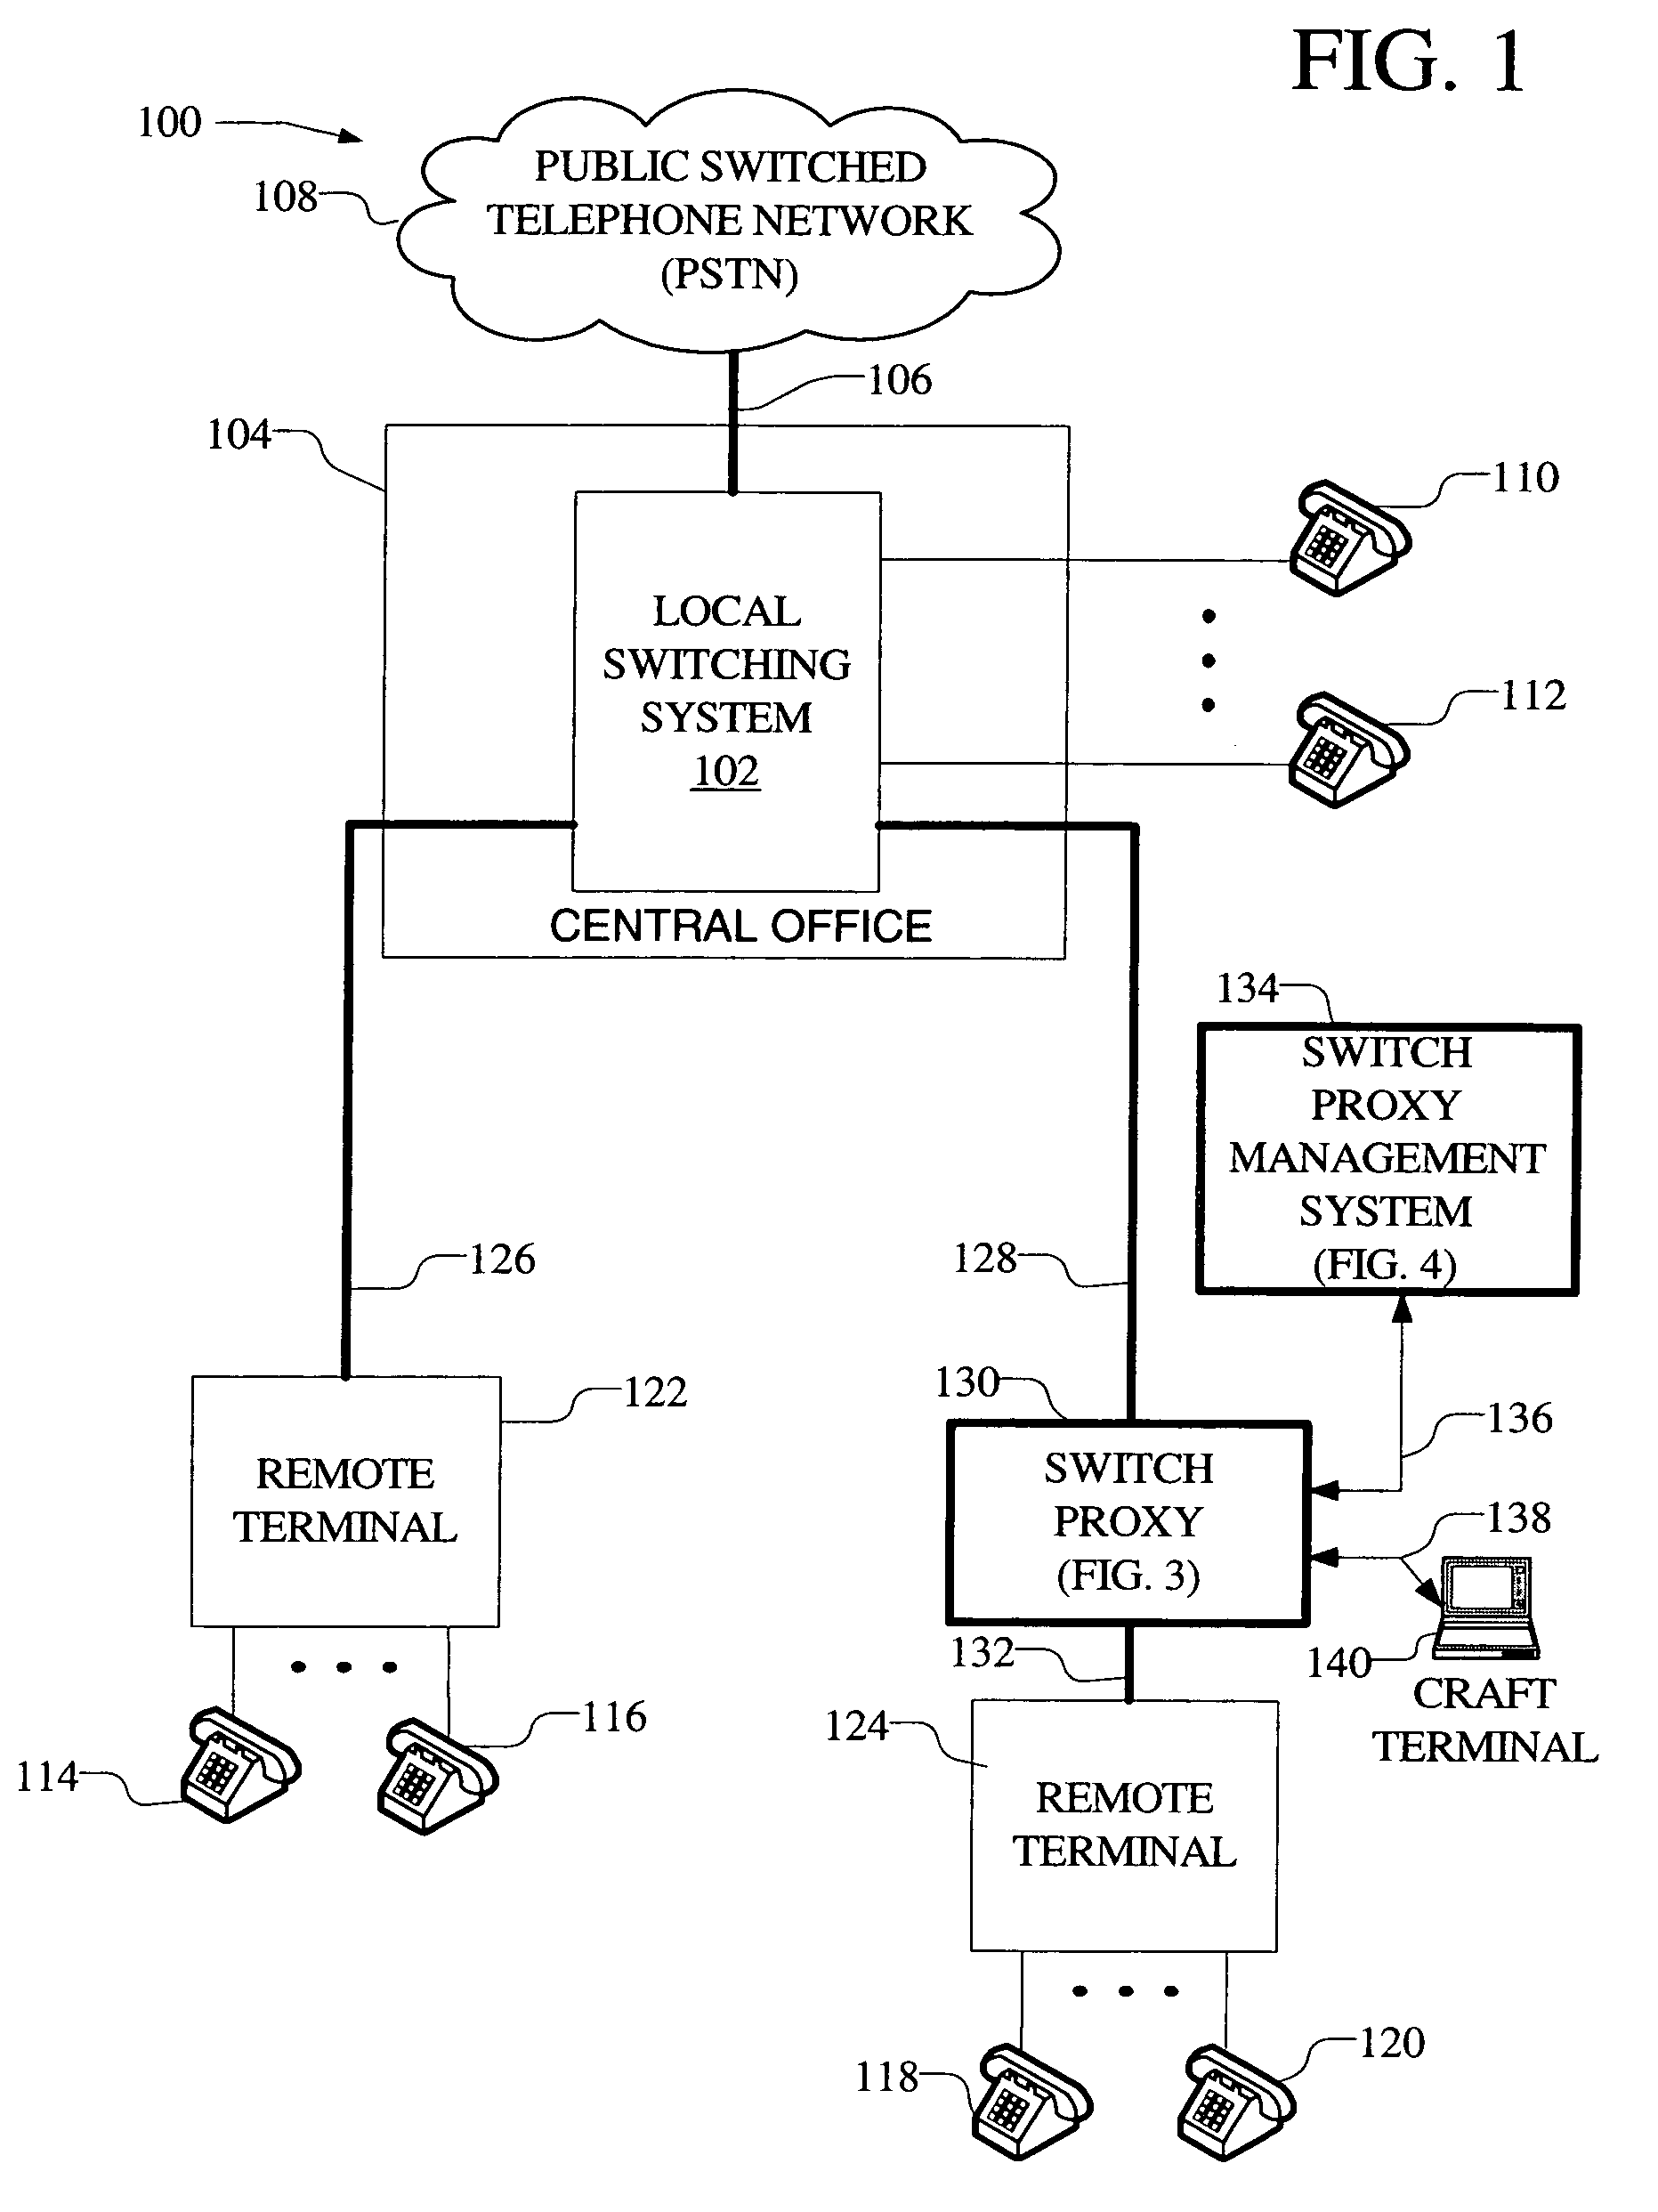 Switch proxy for providing emergency stand alone service in remote access systems